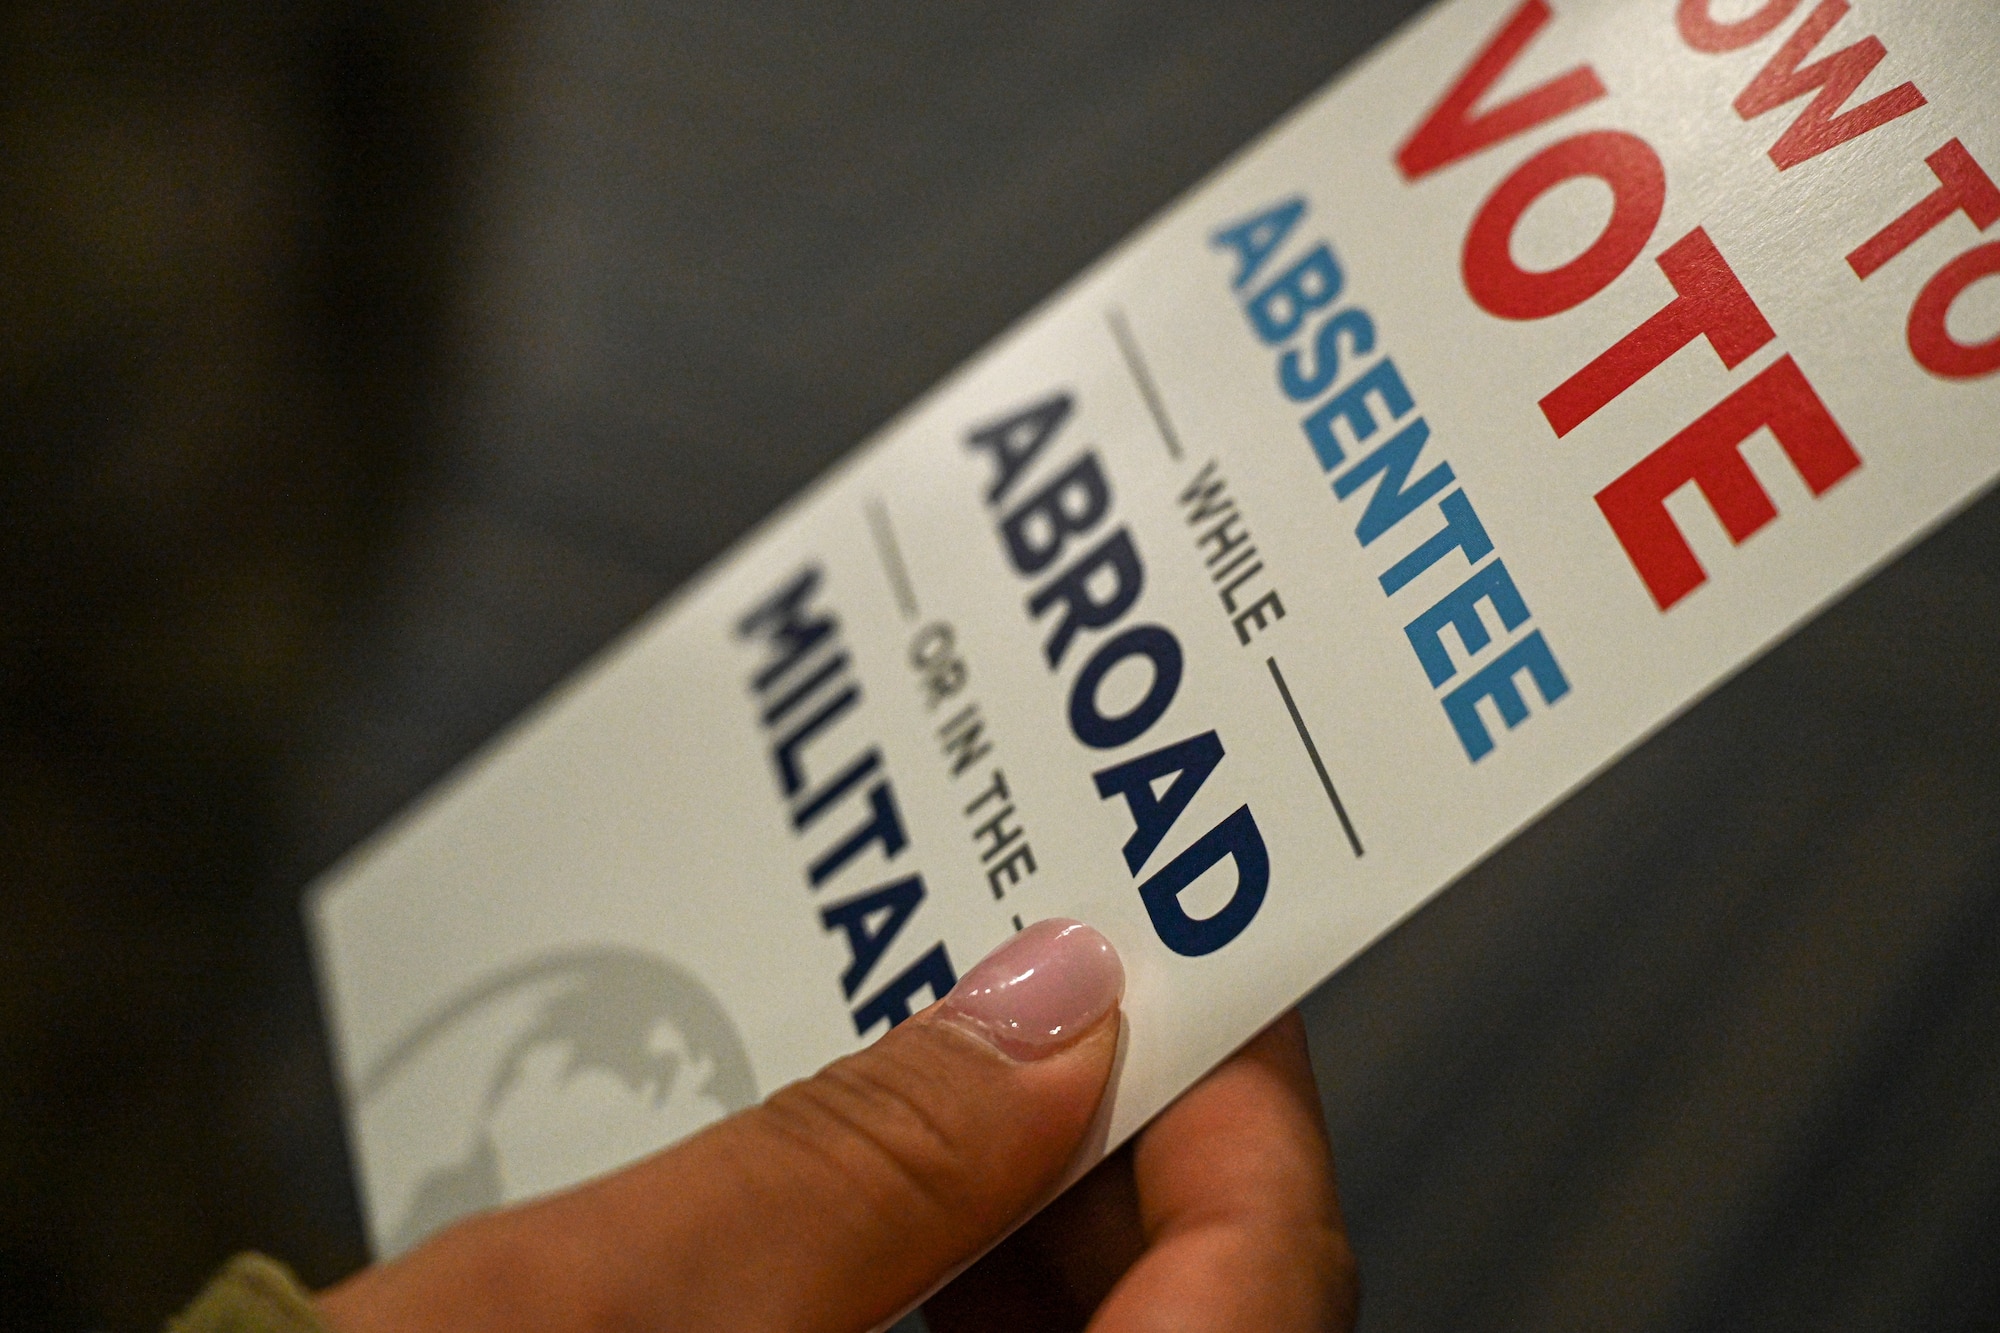 A pamphlet about absentee voting is displayed in someone's hand.